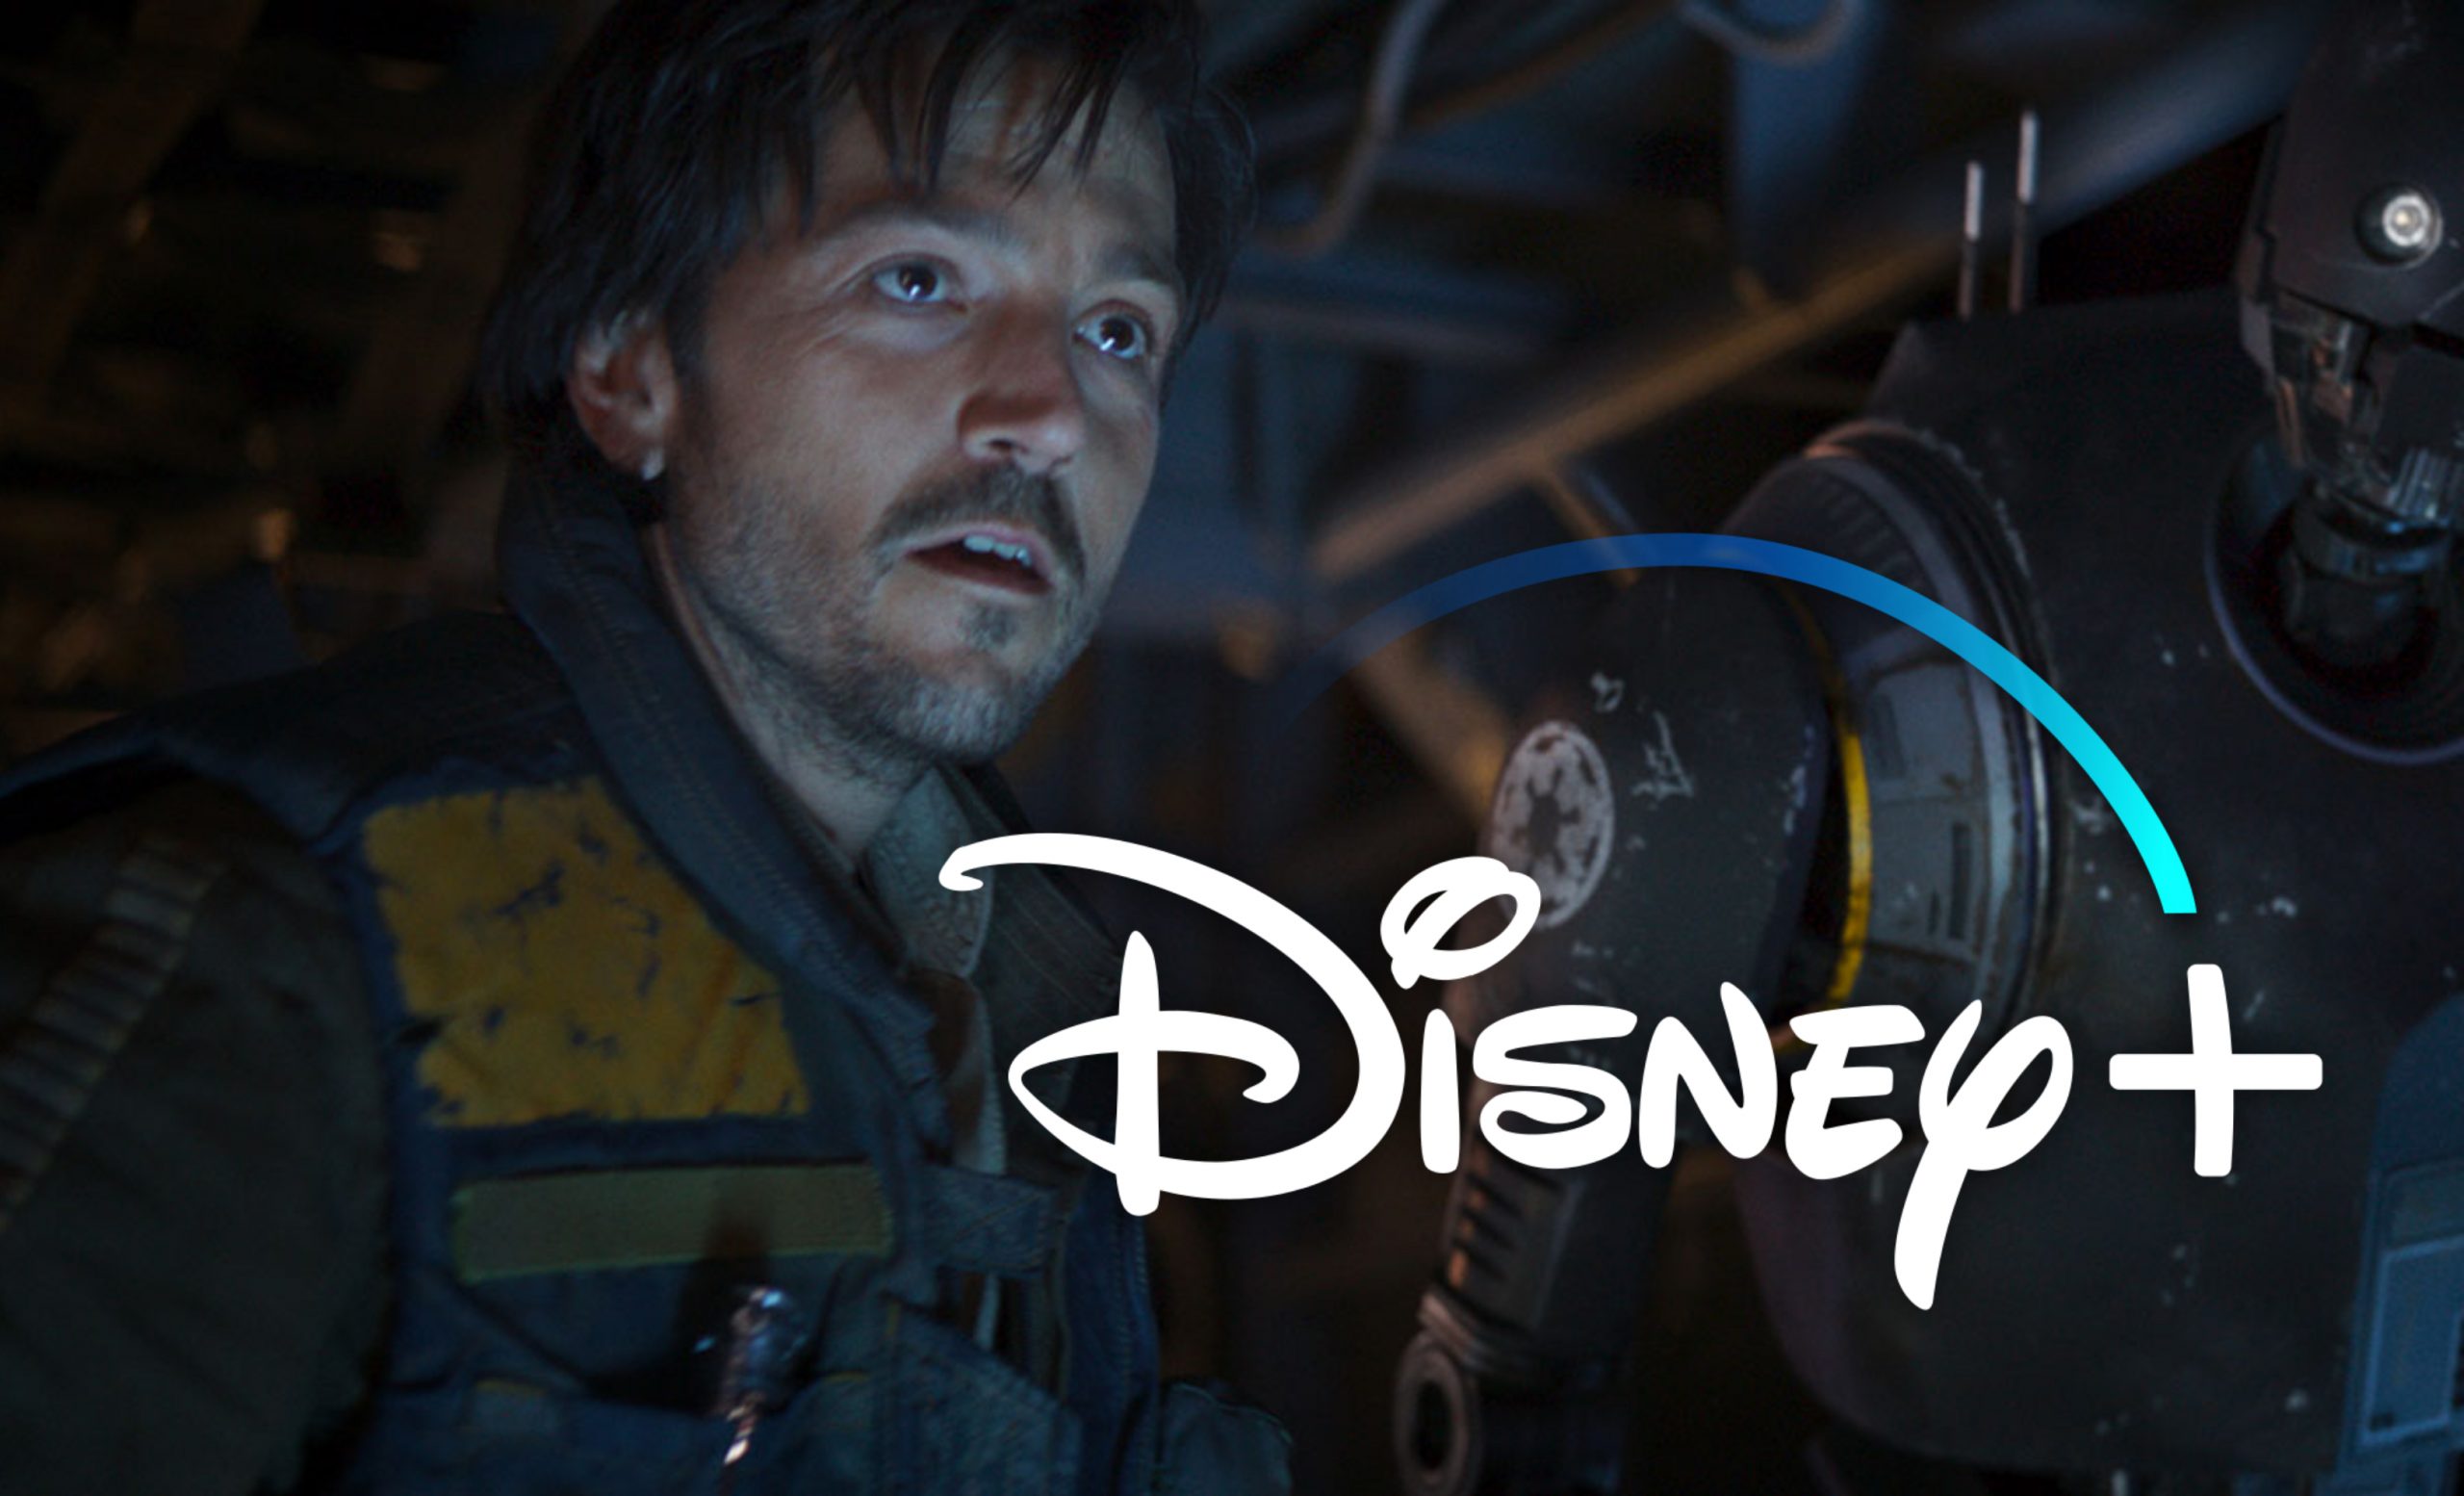 New Star Wars ‘Cassian Andor’ Disney+ Series Synopsis Revealed